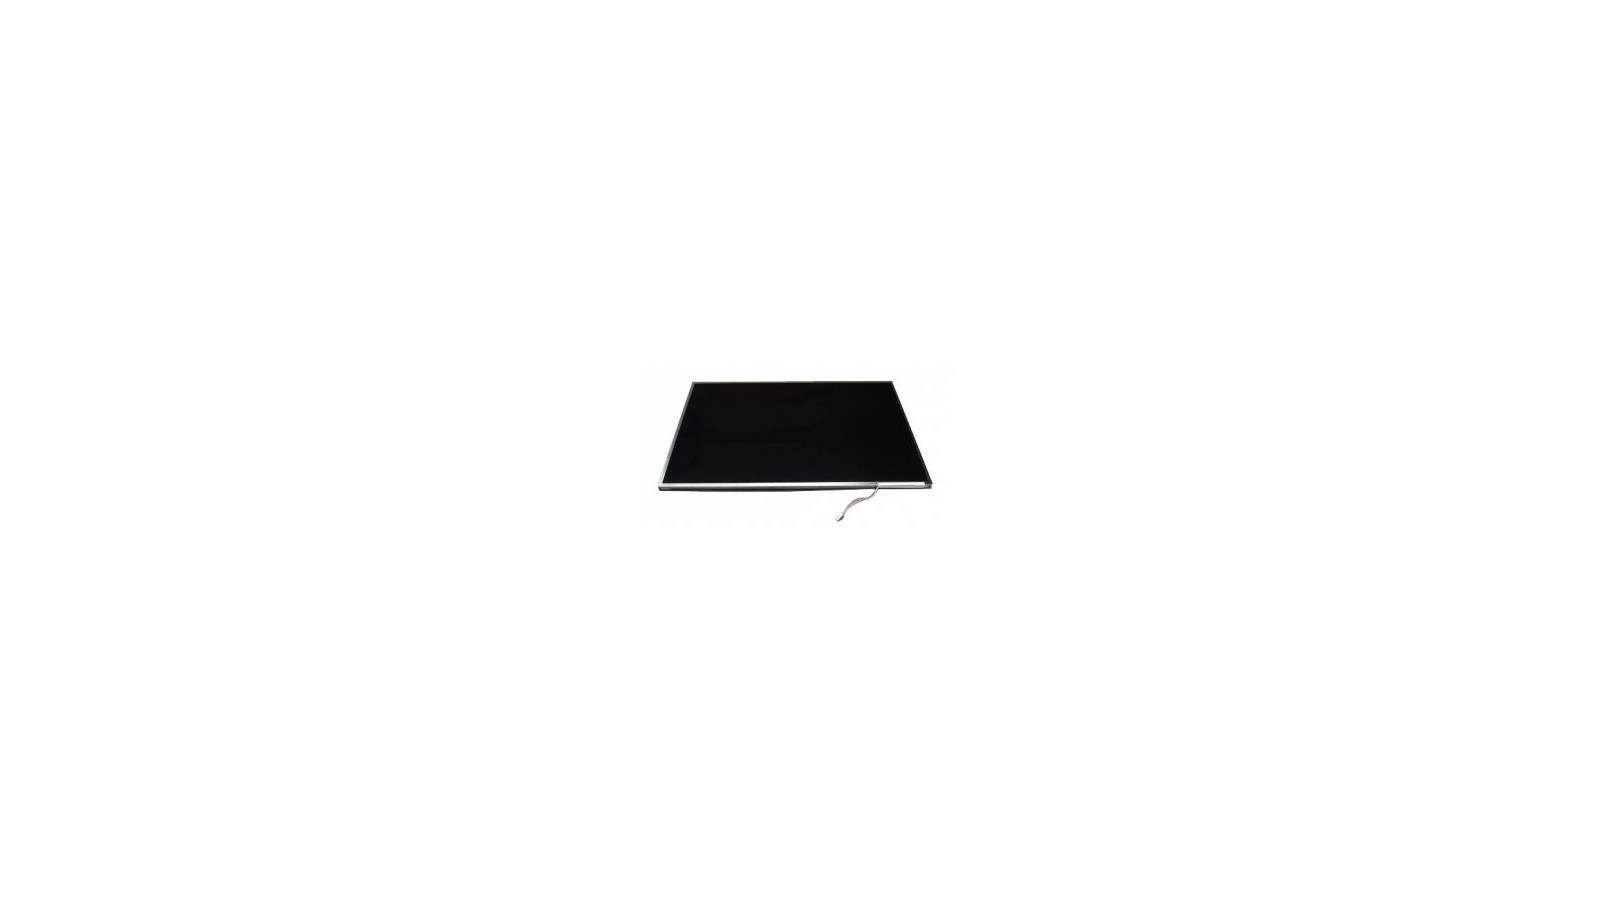 Display monitor lcd 17" Acer Aspire 7720 7520 7110 7103